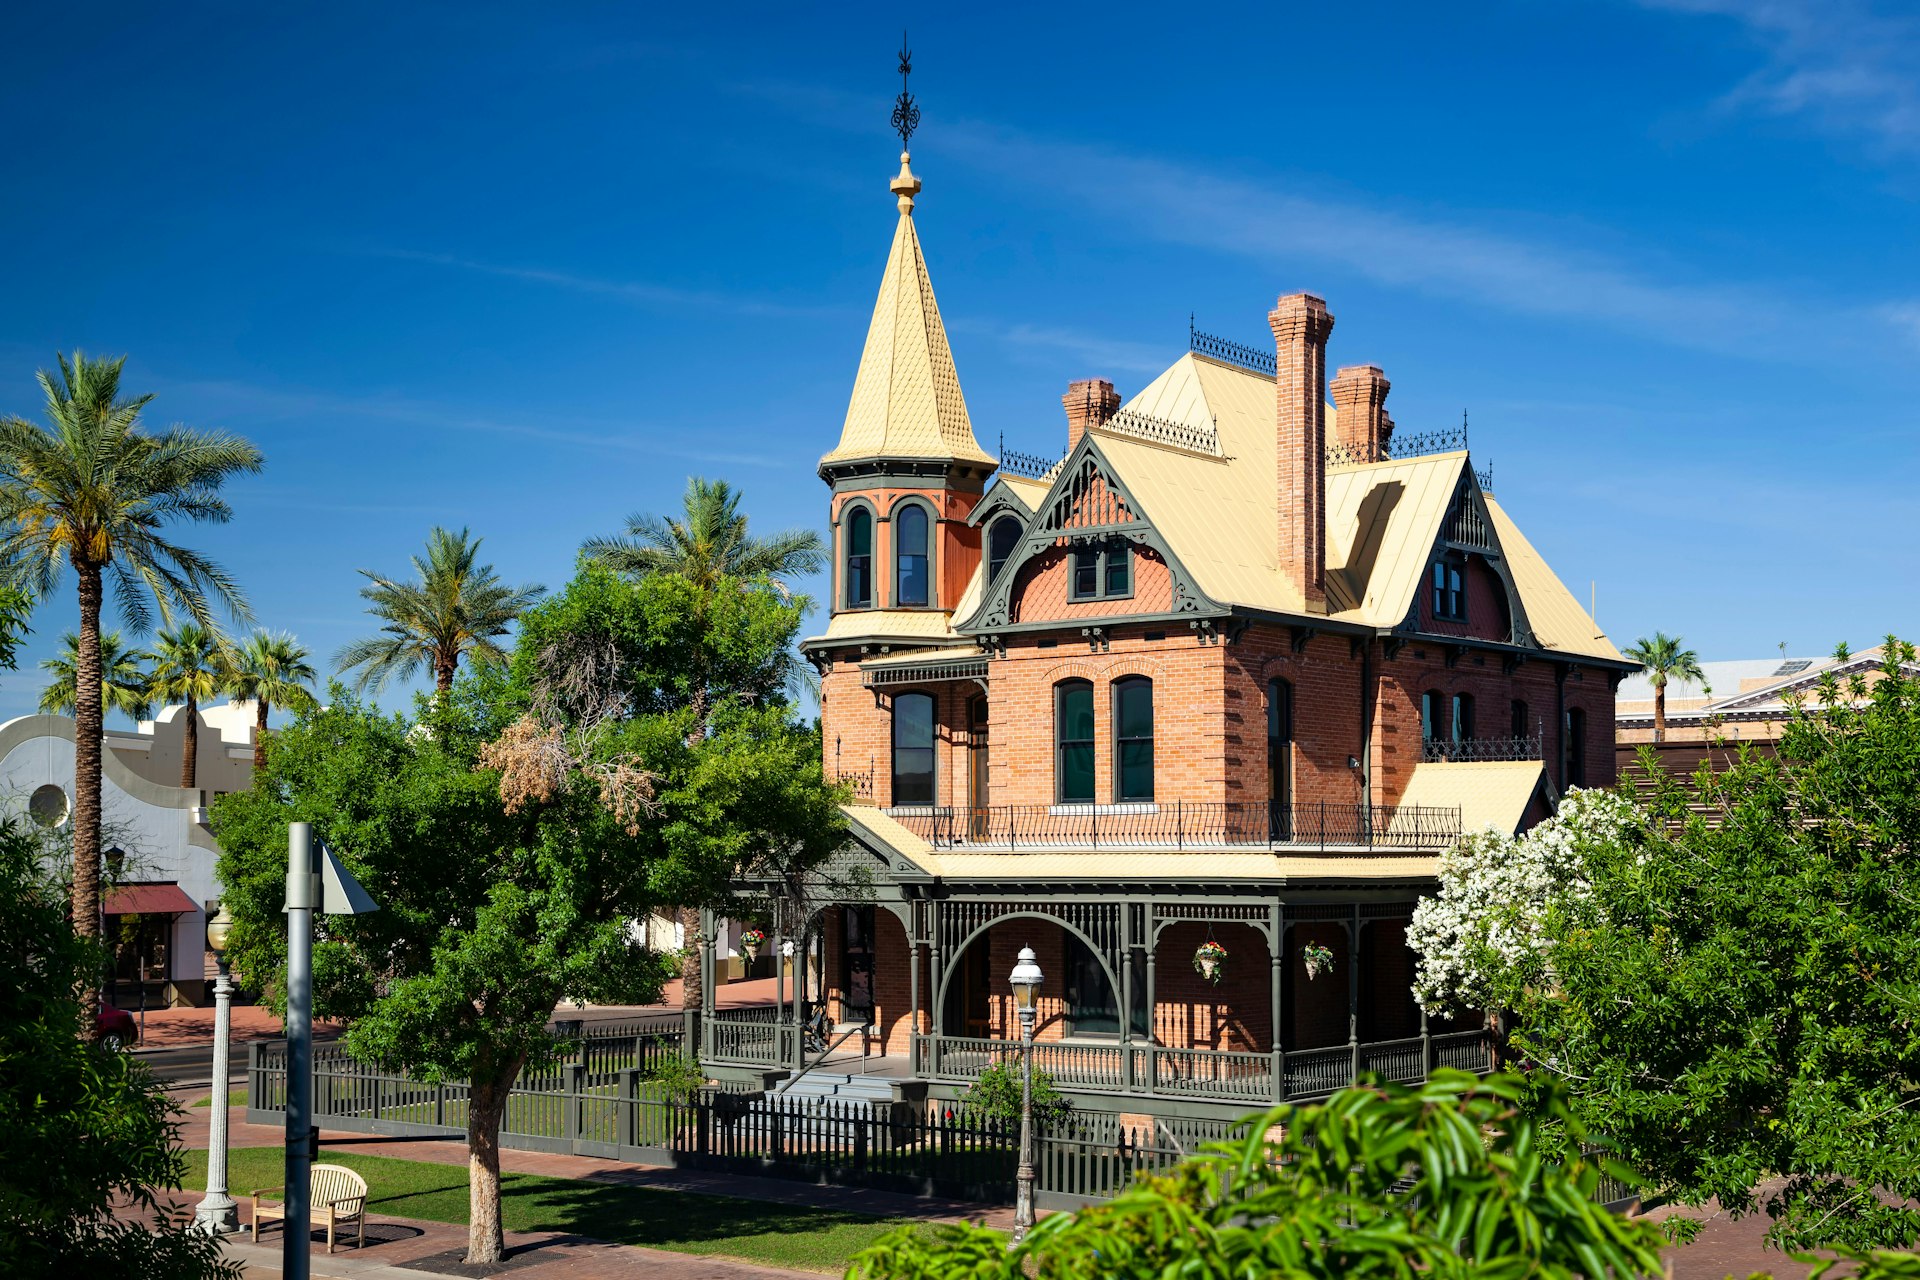 The turrets and yellow roof of the Victorian-style Rosson House Museum on Heritage Square Park, Phoenix, Arizona in the USA peep through green trees on a clear afternoon